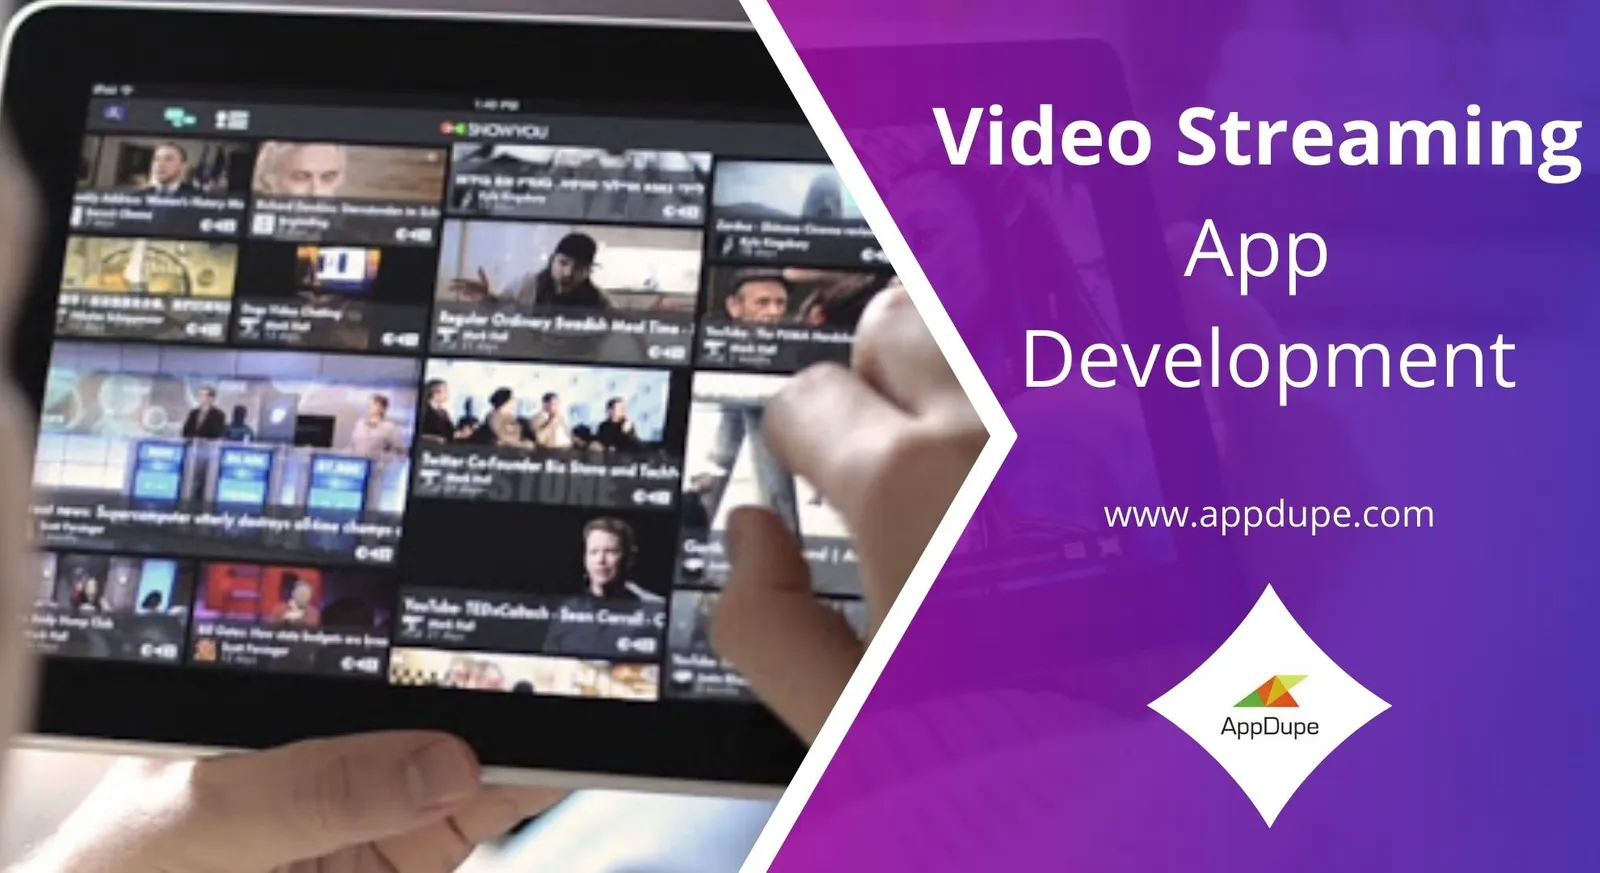 Challenges faced during video-on-demand app development